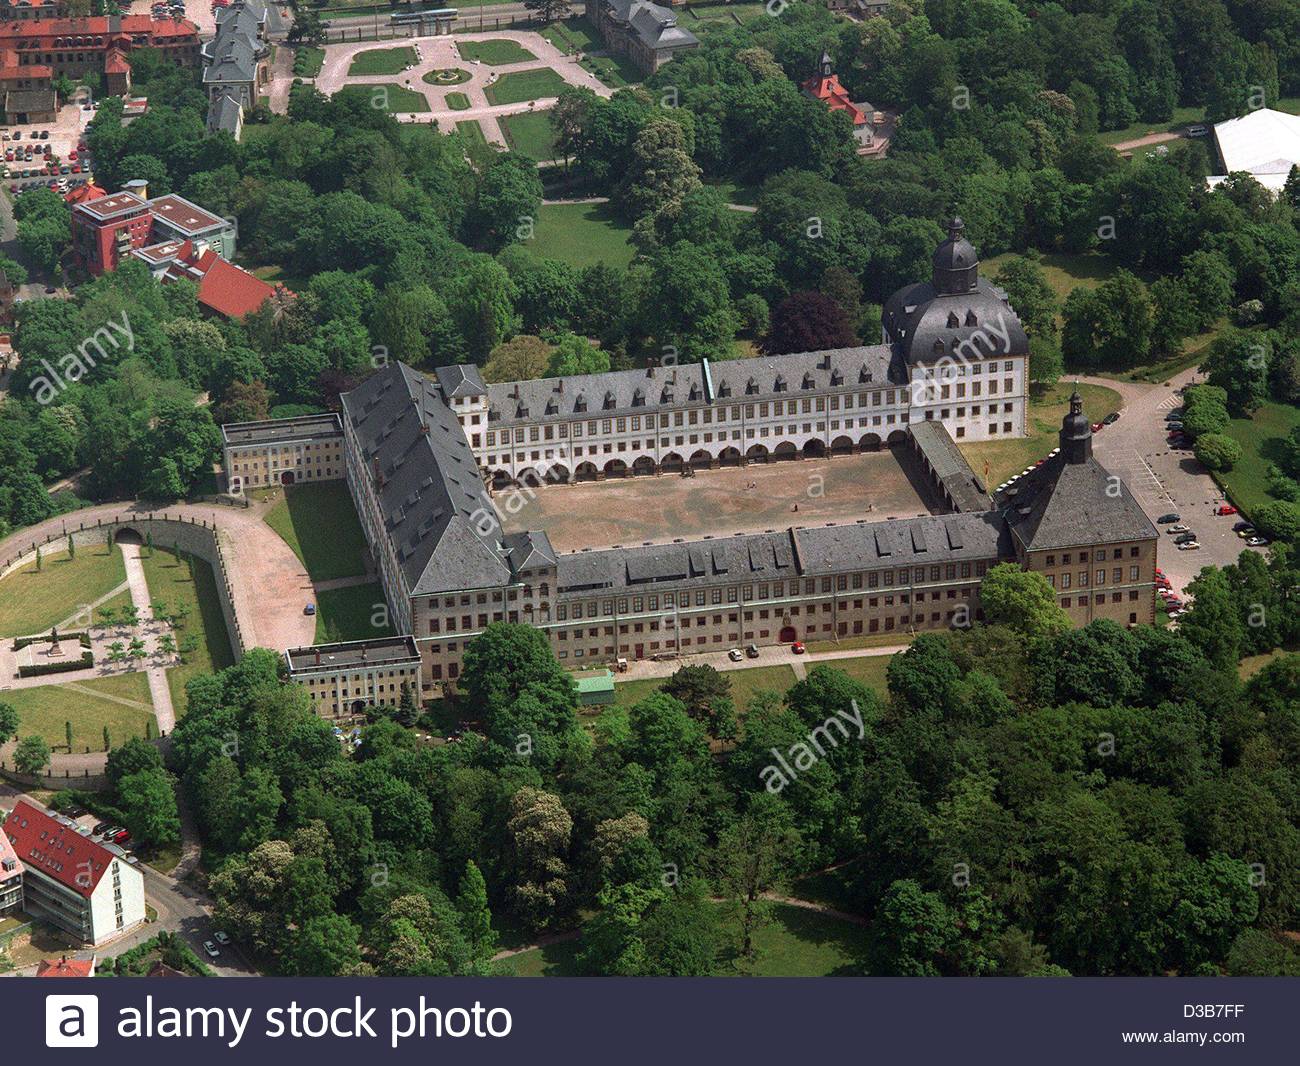 Amazing Friedenstein Castle Pictures & Backgrounds